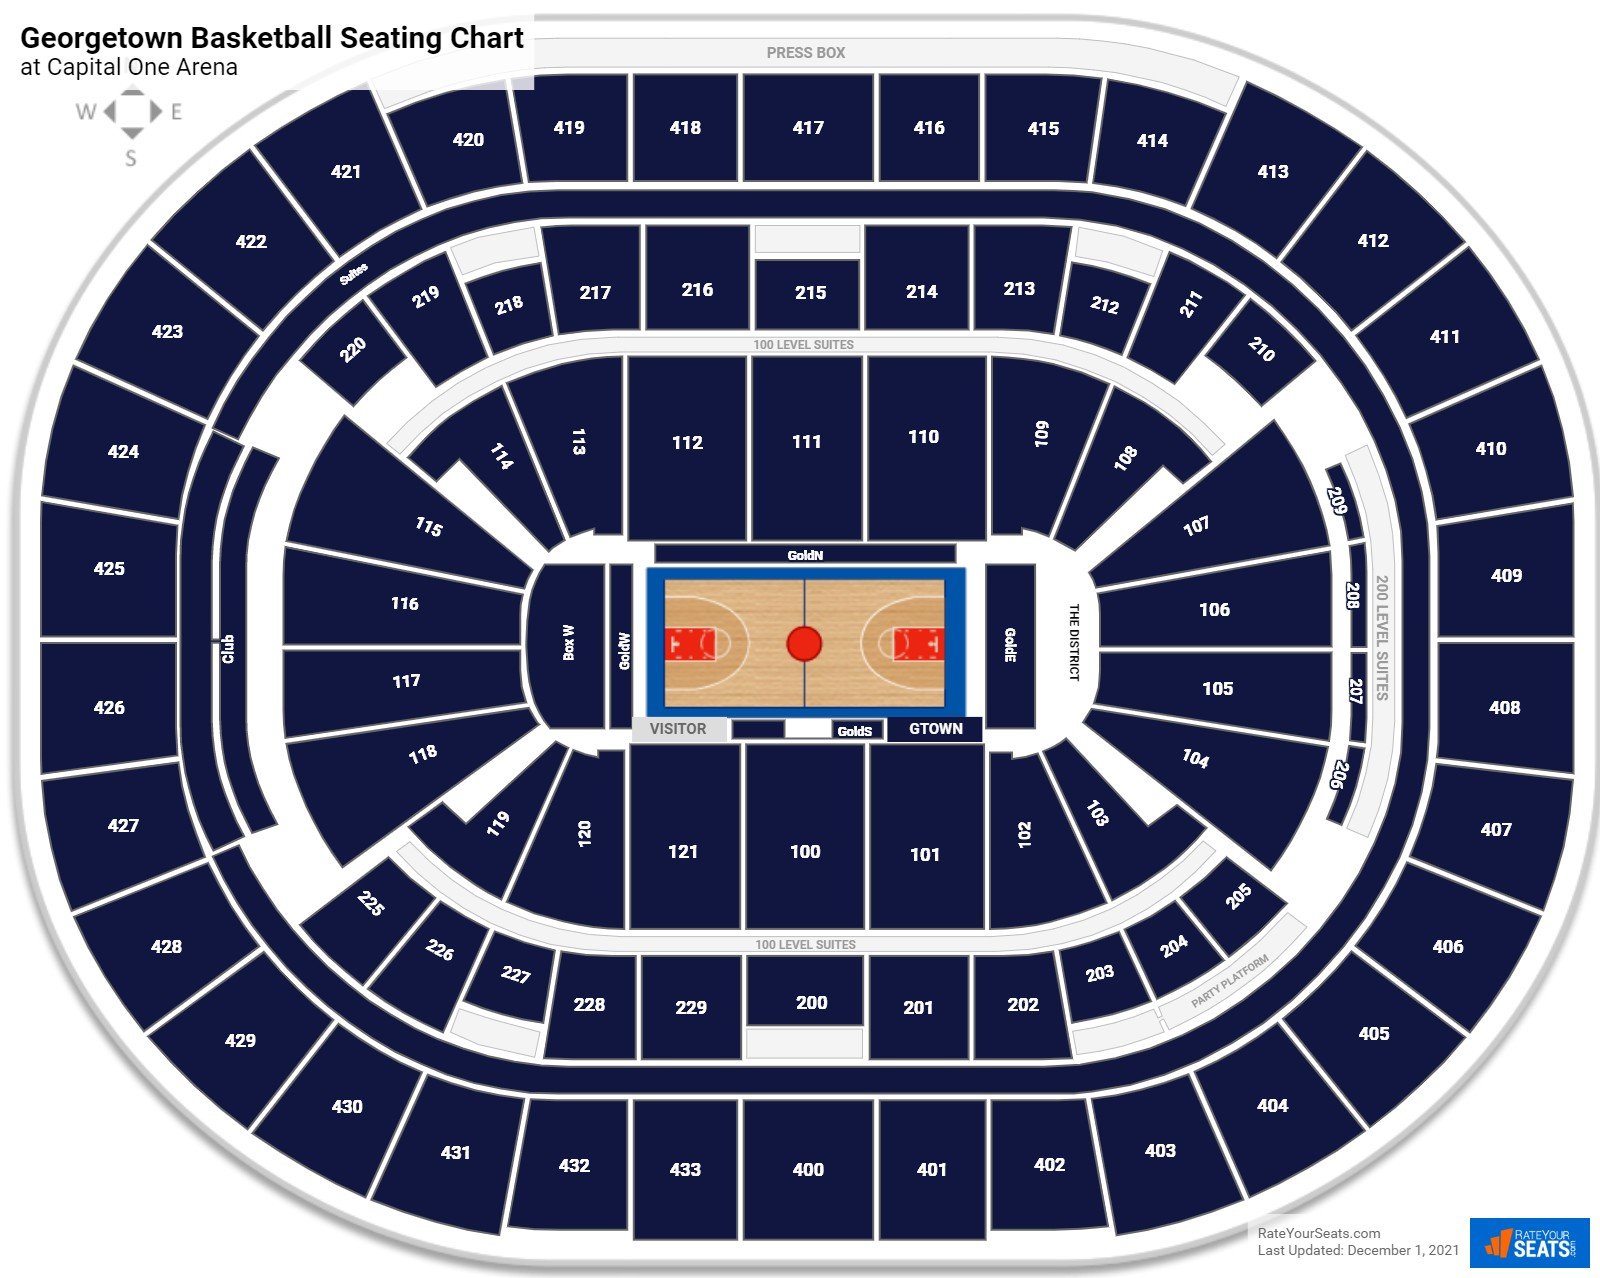 Georgetown Hoyas Seating Chart at Capital One Arena